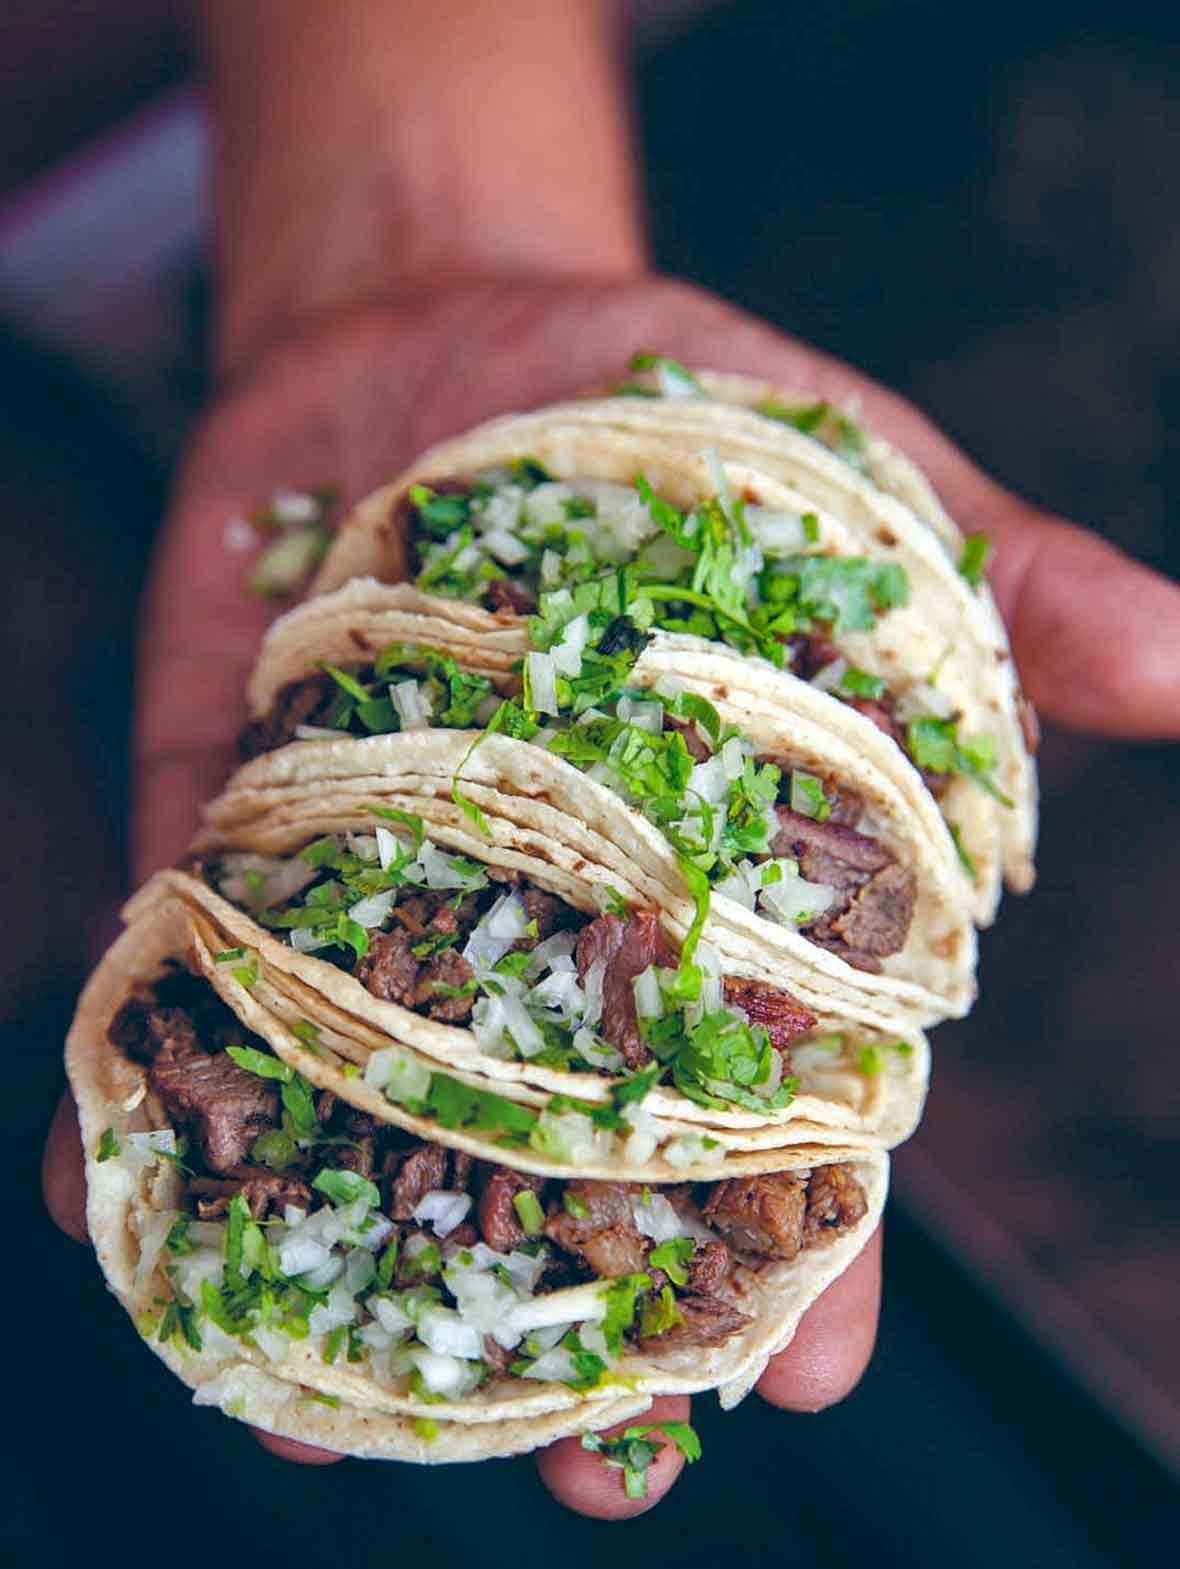 Man's hand holding four beef tongue tacos, or taquitos de lengua, filled with cubed meat, onions, cilantro